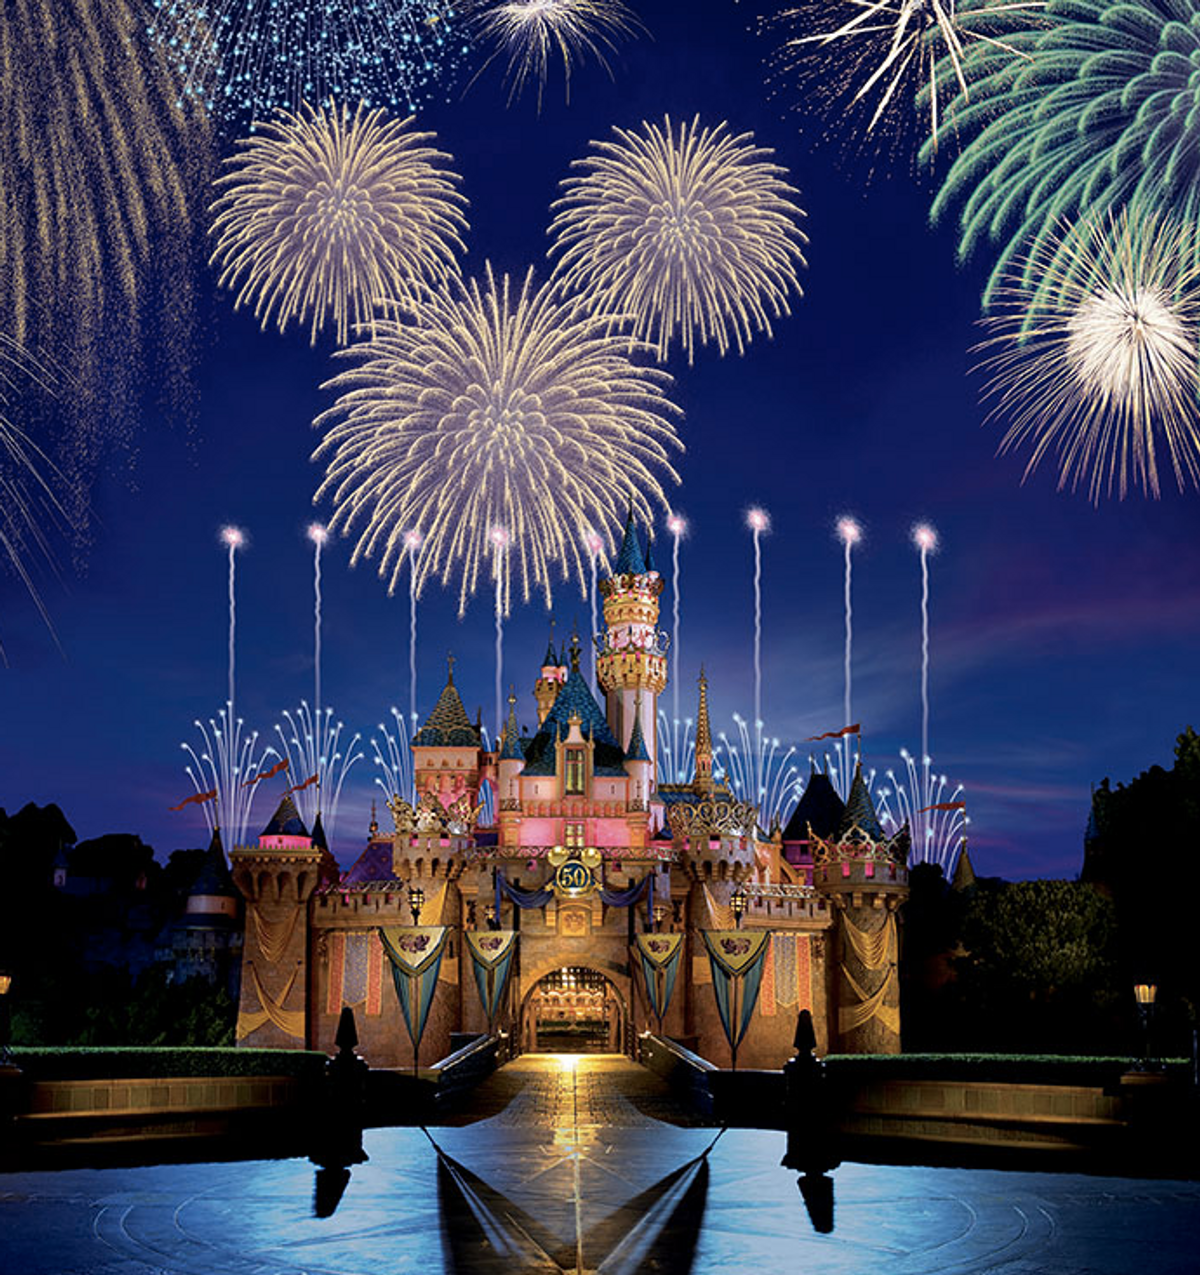 7 Things You Have to do at Disneyland